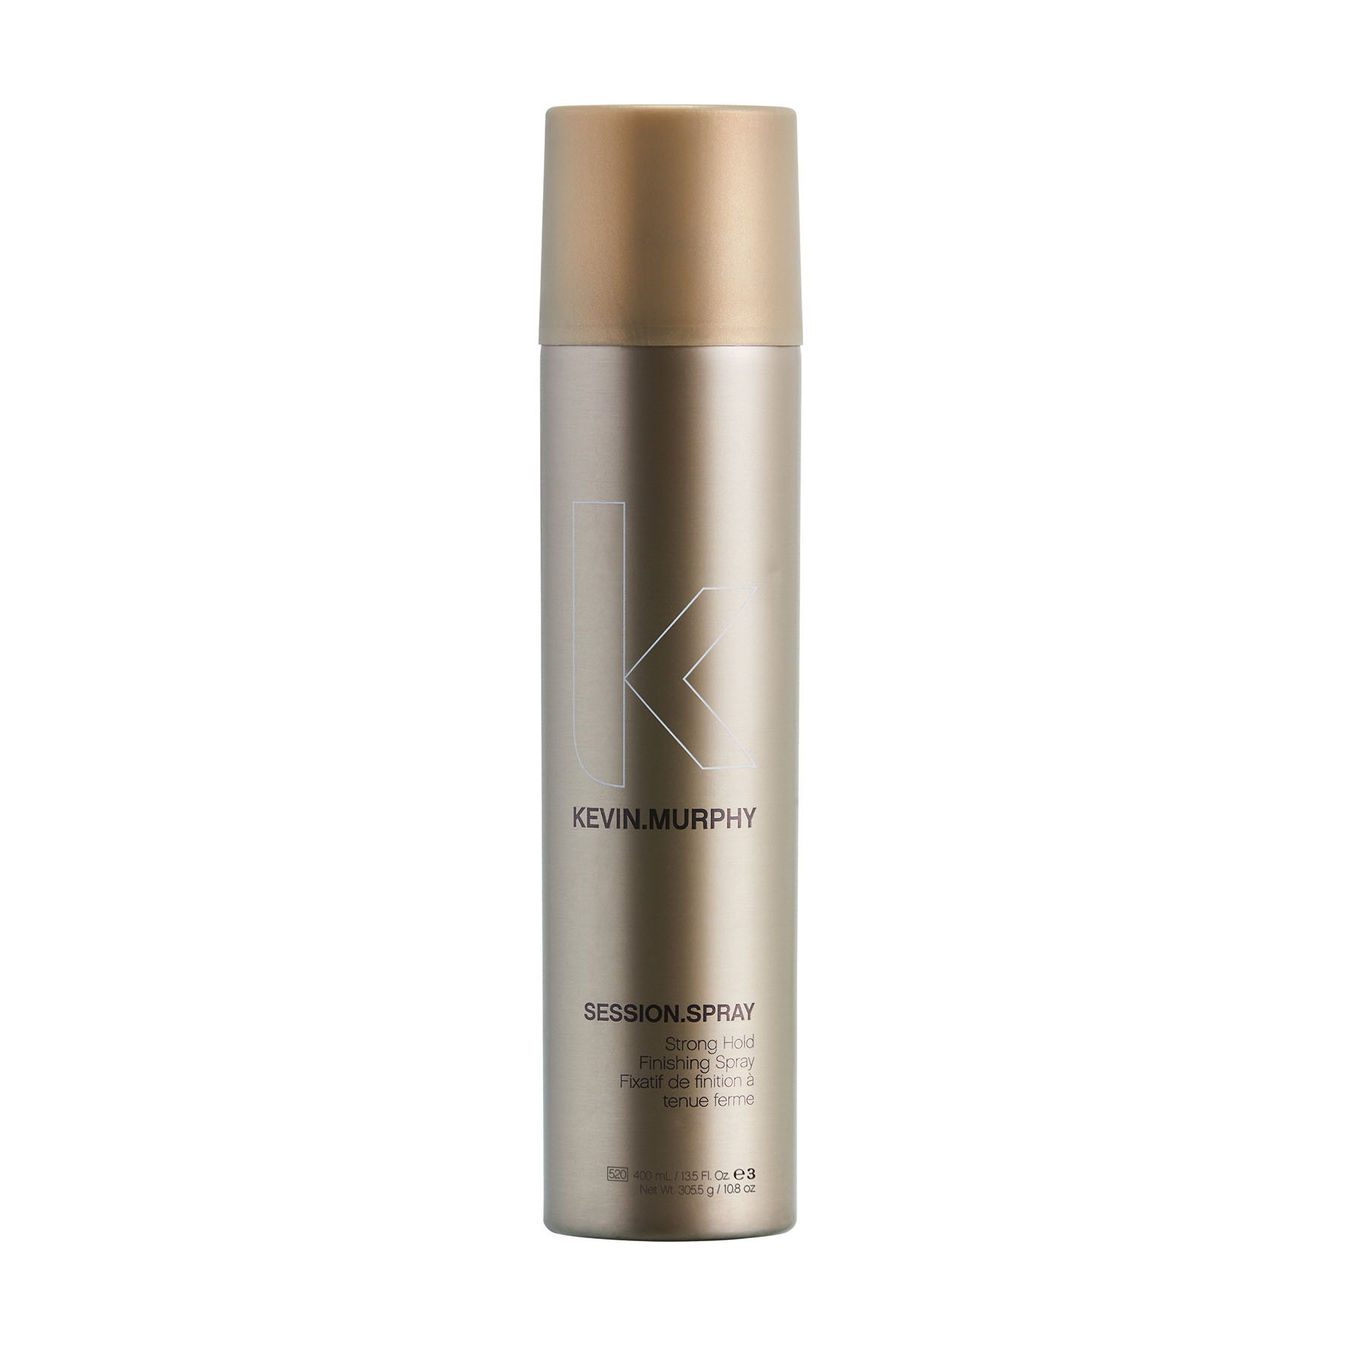 KEVIN.MURPHY Session.Spray Strong hold finishing spray von Kevin.murphy